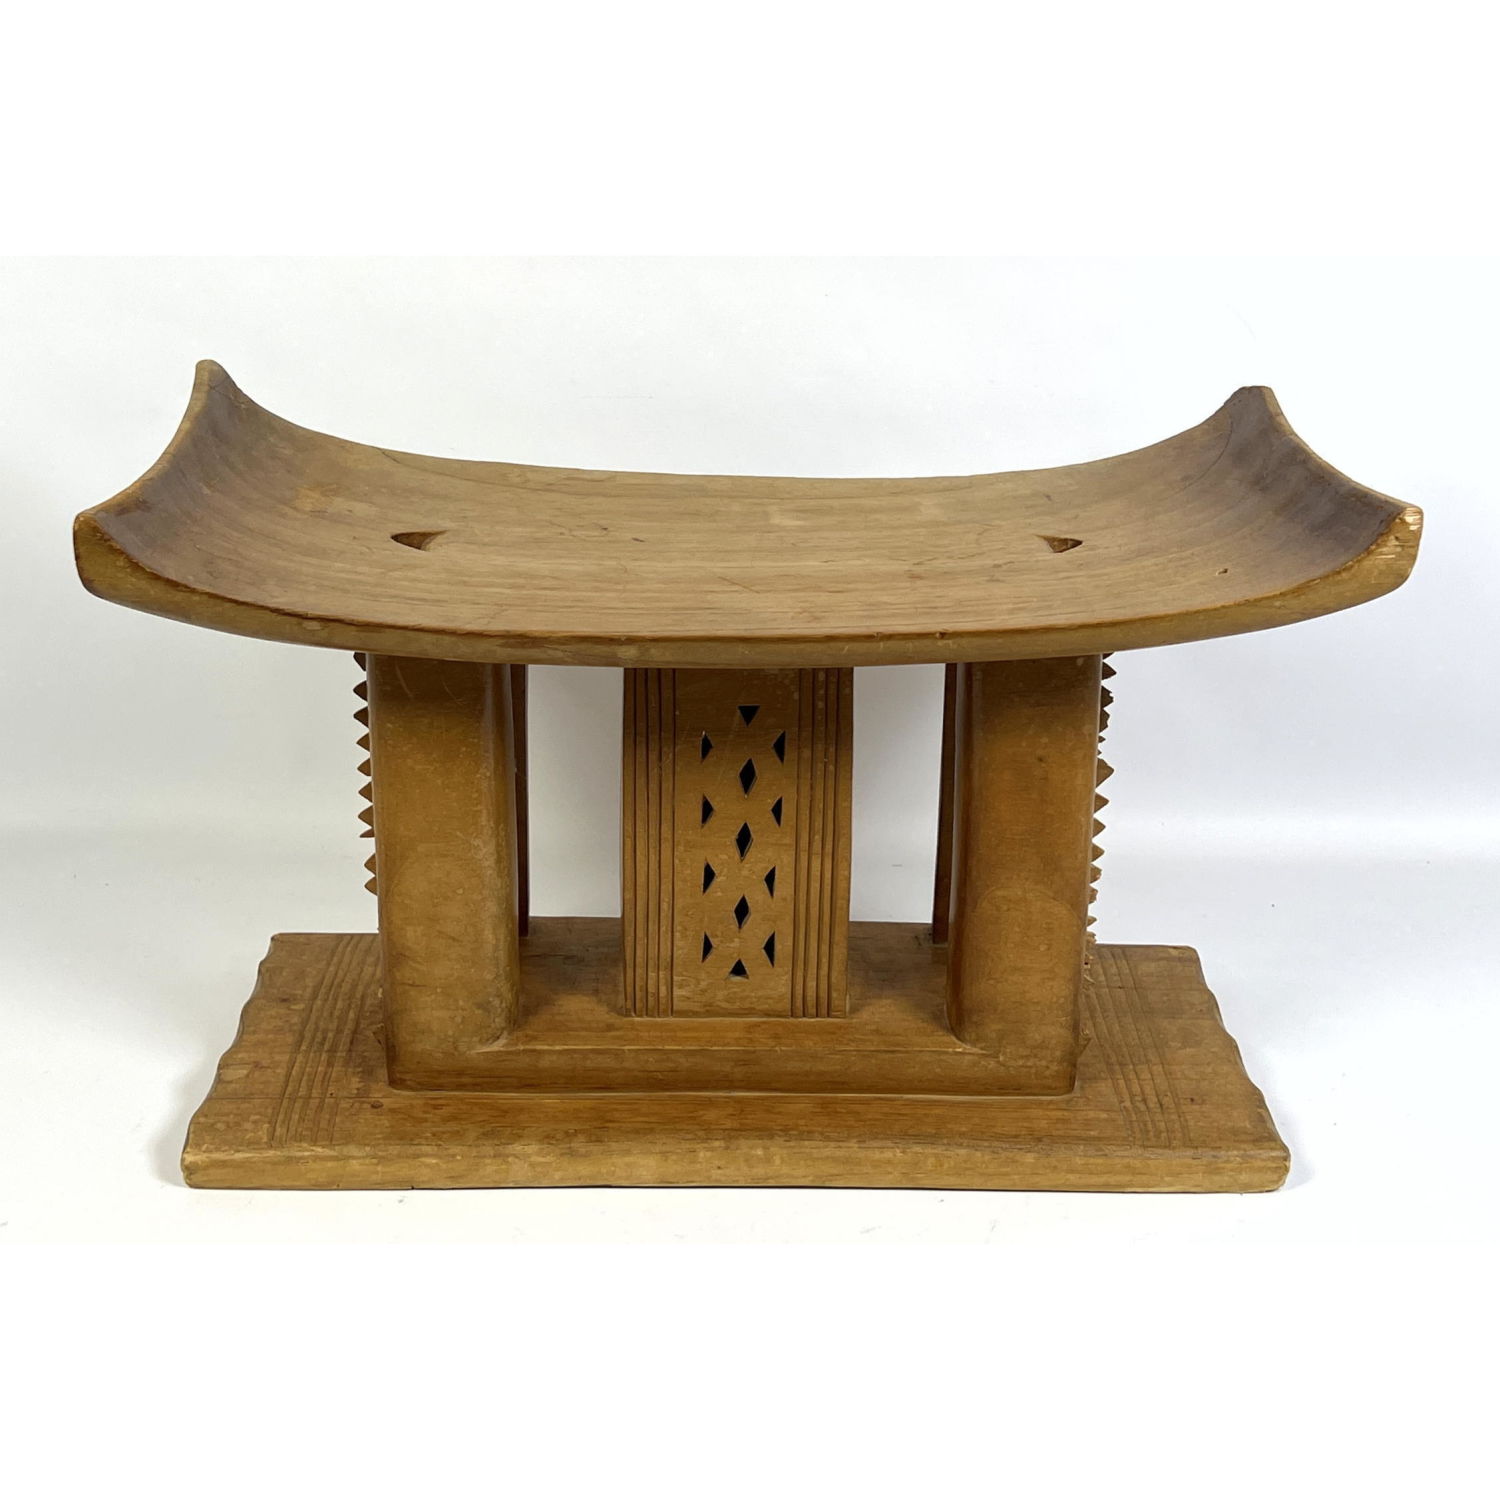 Ashanti Queen Stool. Carved Wood.